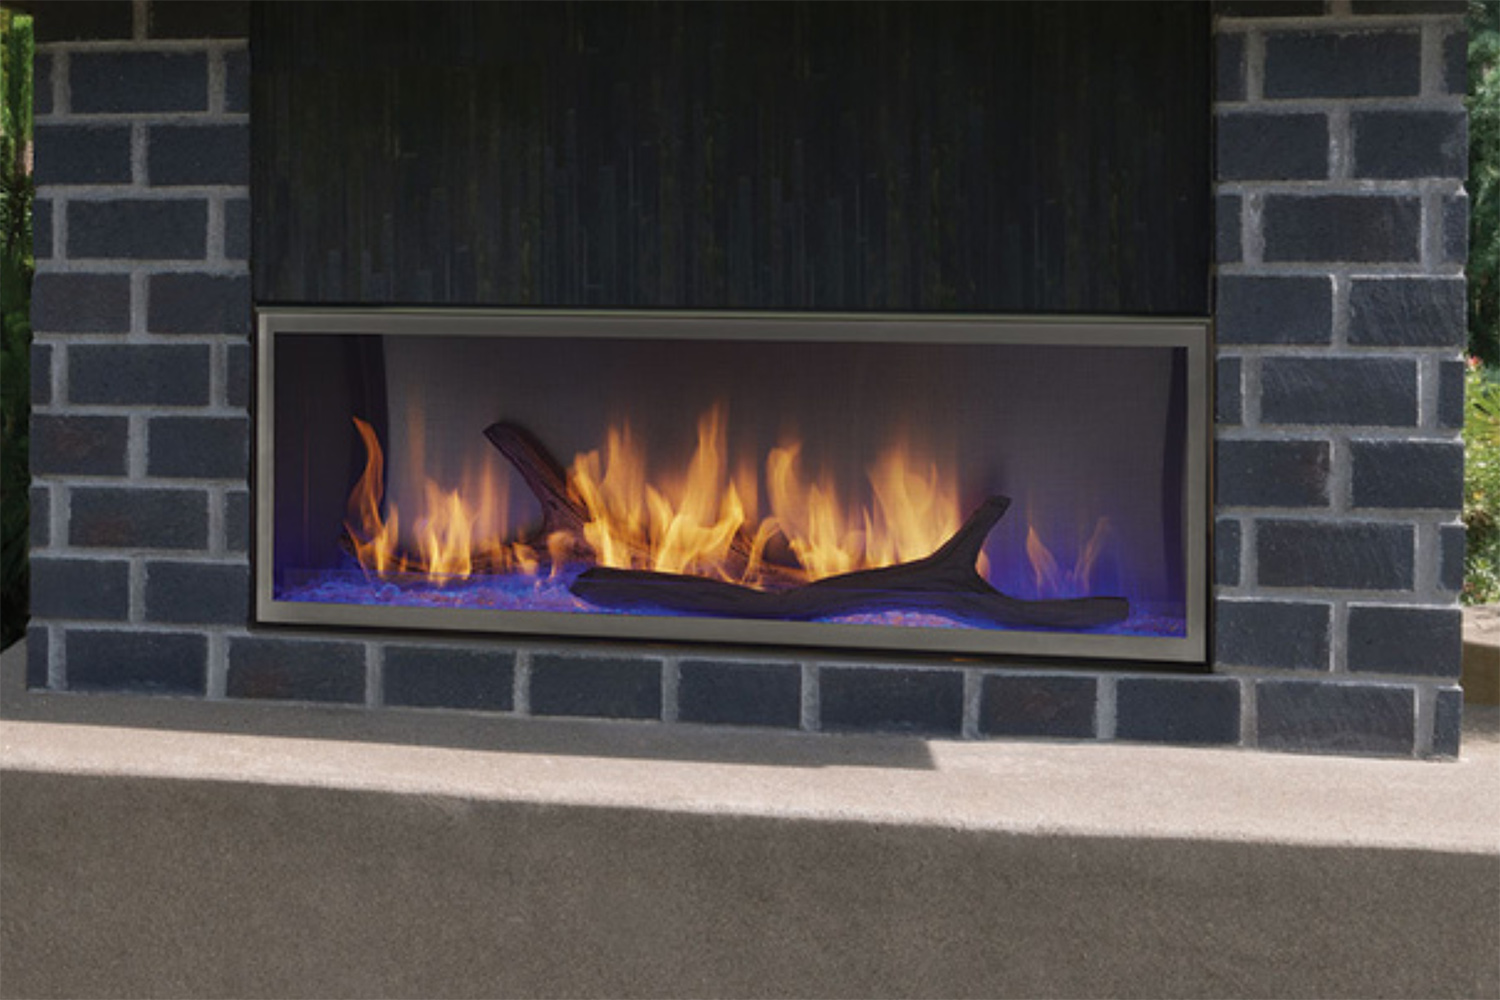 OUTDOOR LINEAR GAS FIREPLACE